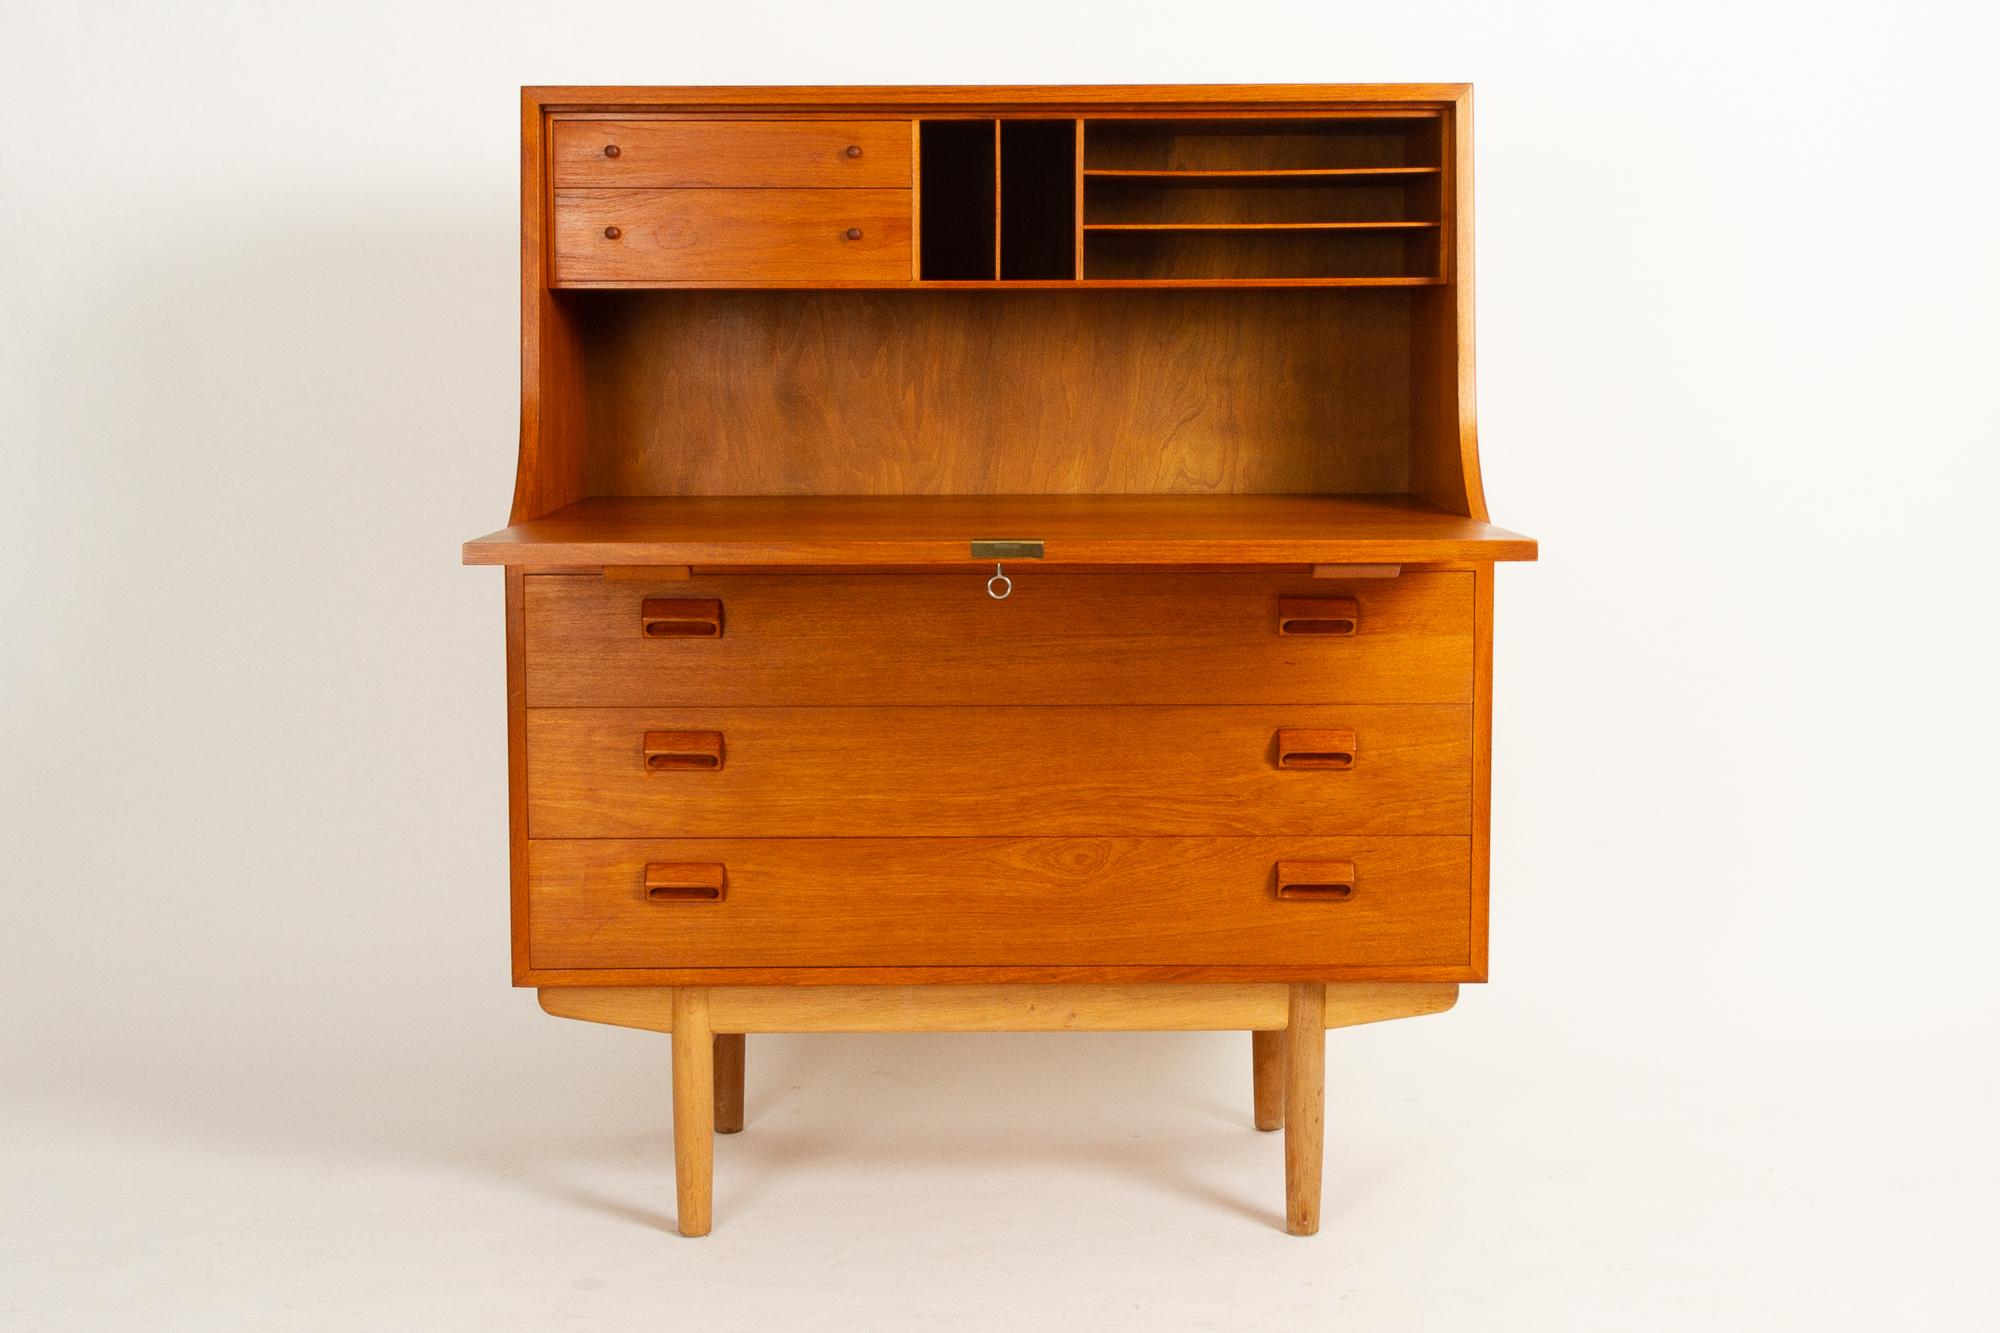 Midcentury teak and oak Secretaire by Børge Mogensen for Søborg Møbelfabrik, 1960s.
Large teak secretary with legs in solid oak. Drop down front. Large desk area. Two small drawers and five open compartments above the desk area. Underneath is three